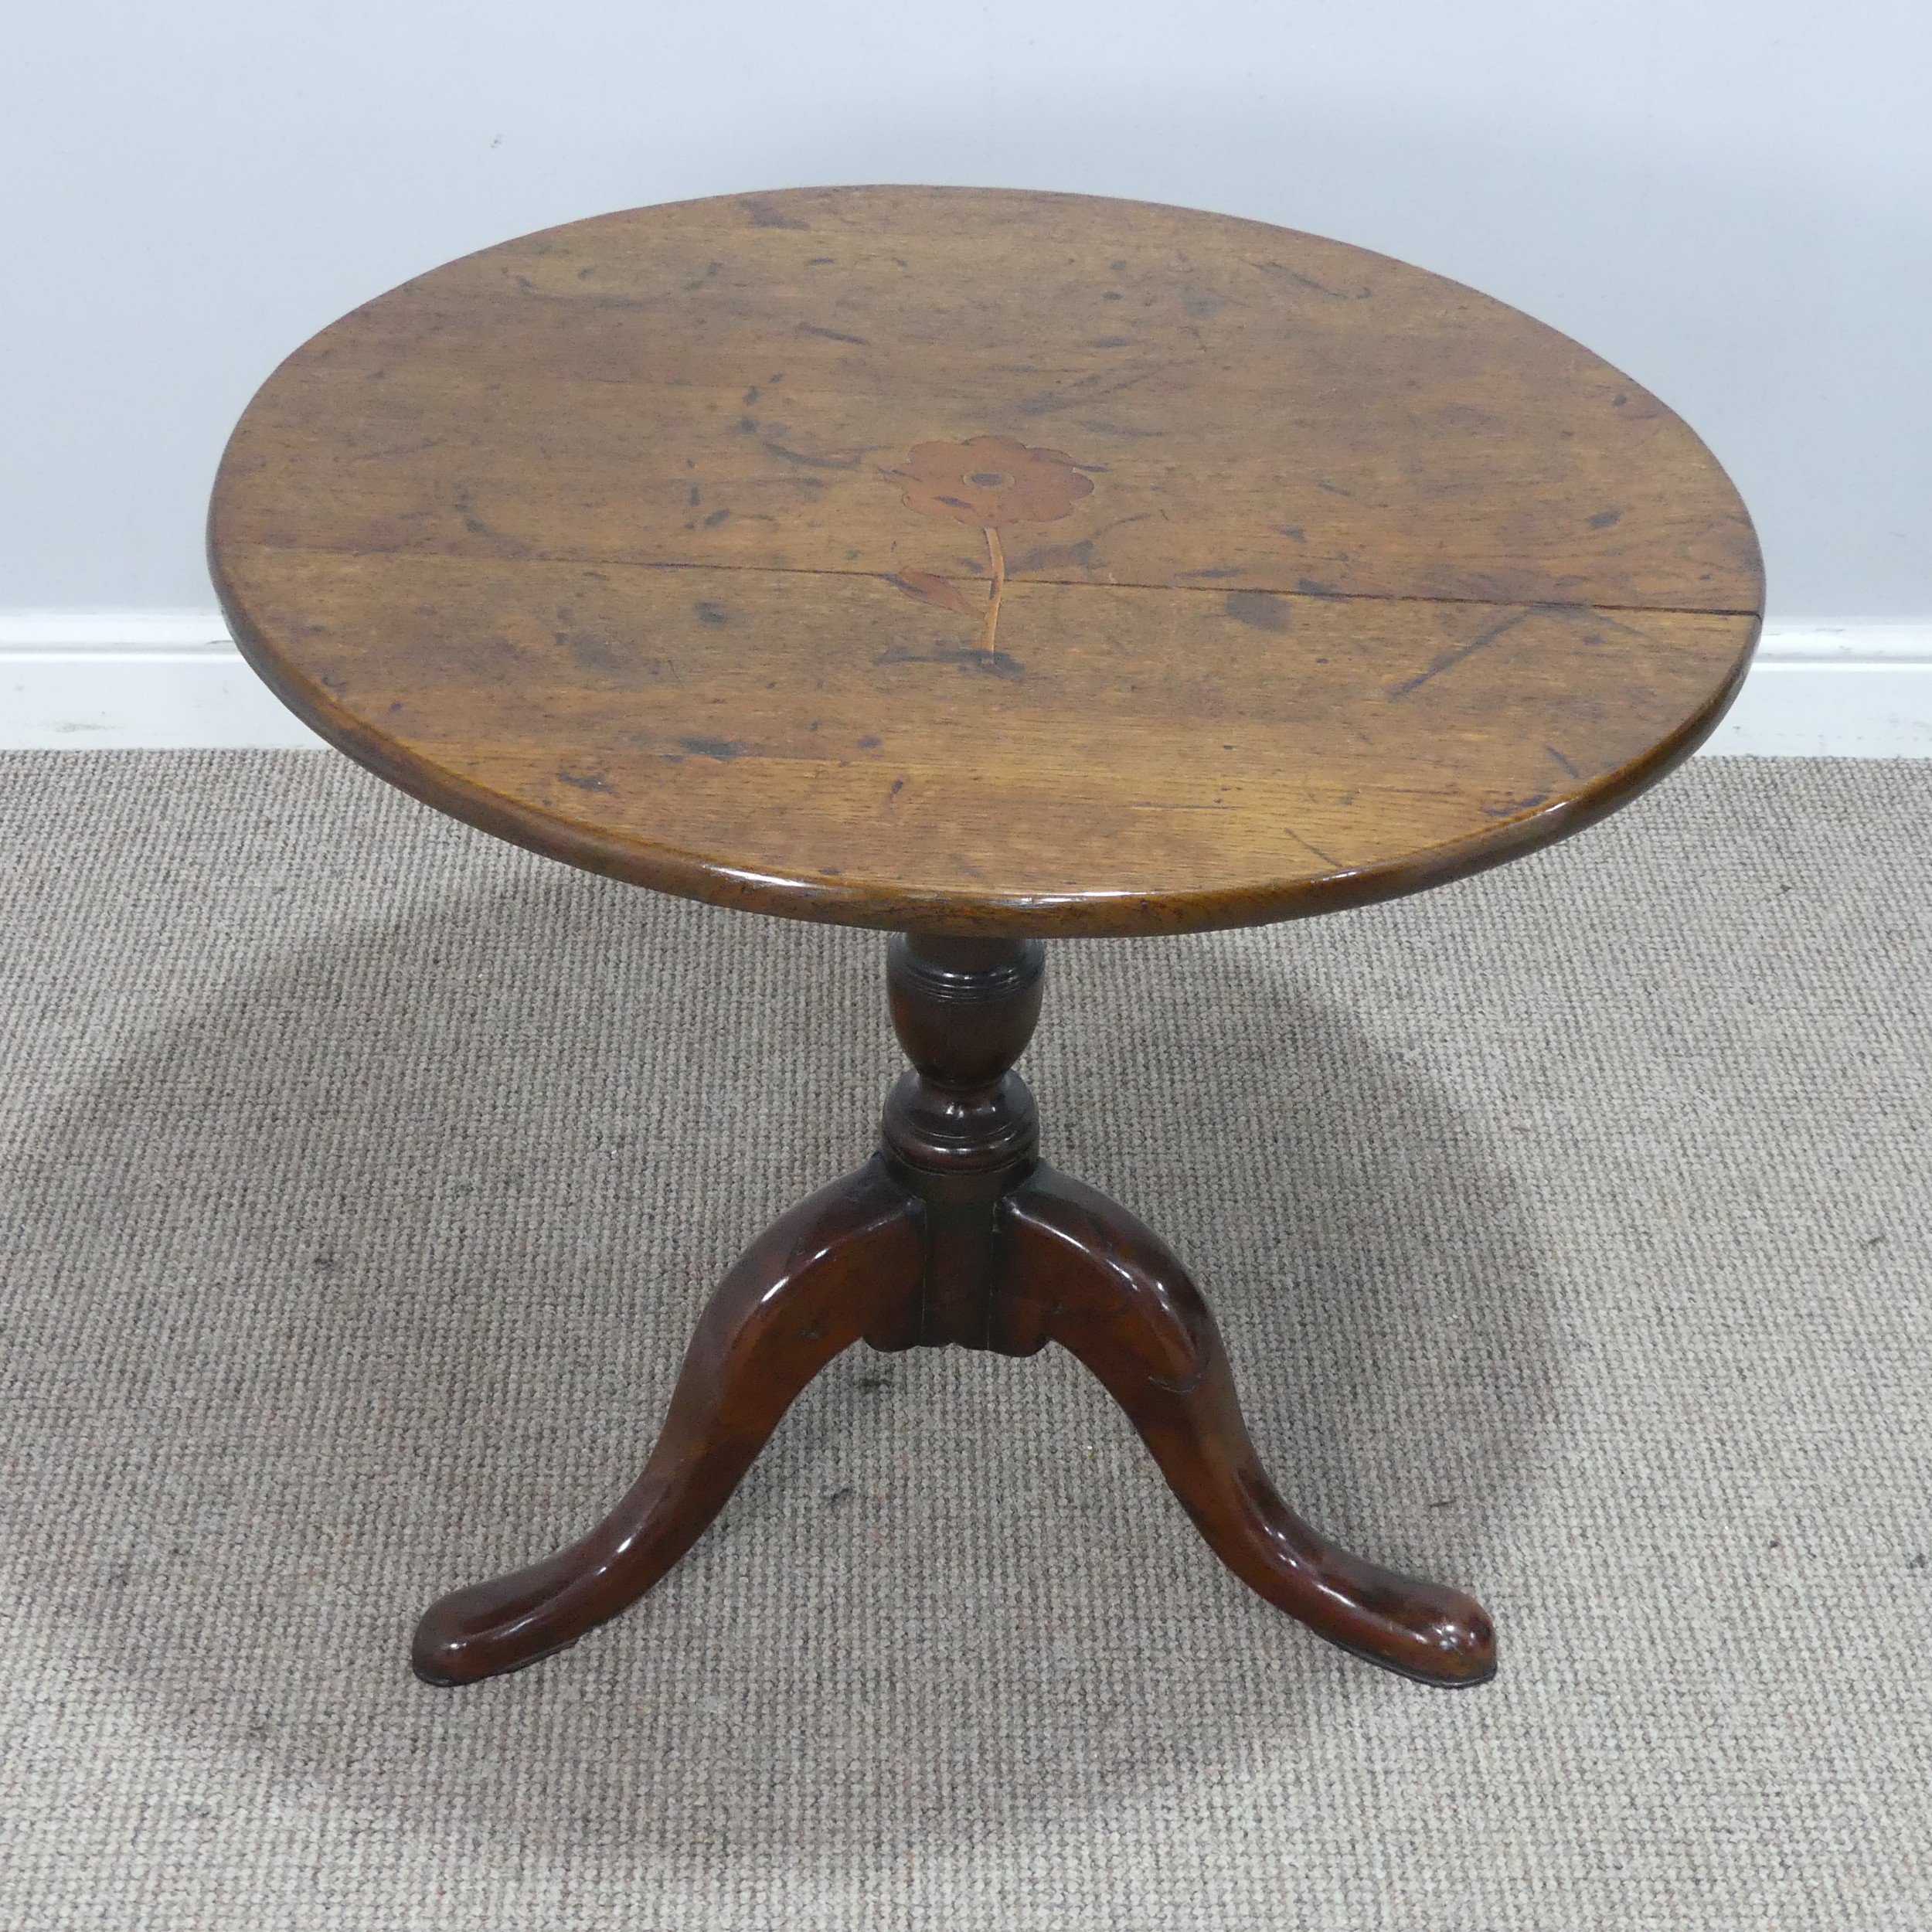 A 19th century oak tilt-top tripod Table, circular top with inlaid design of a flower, W 72.5 cm x H - Image 2 of 4